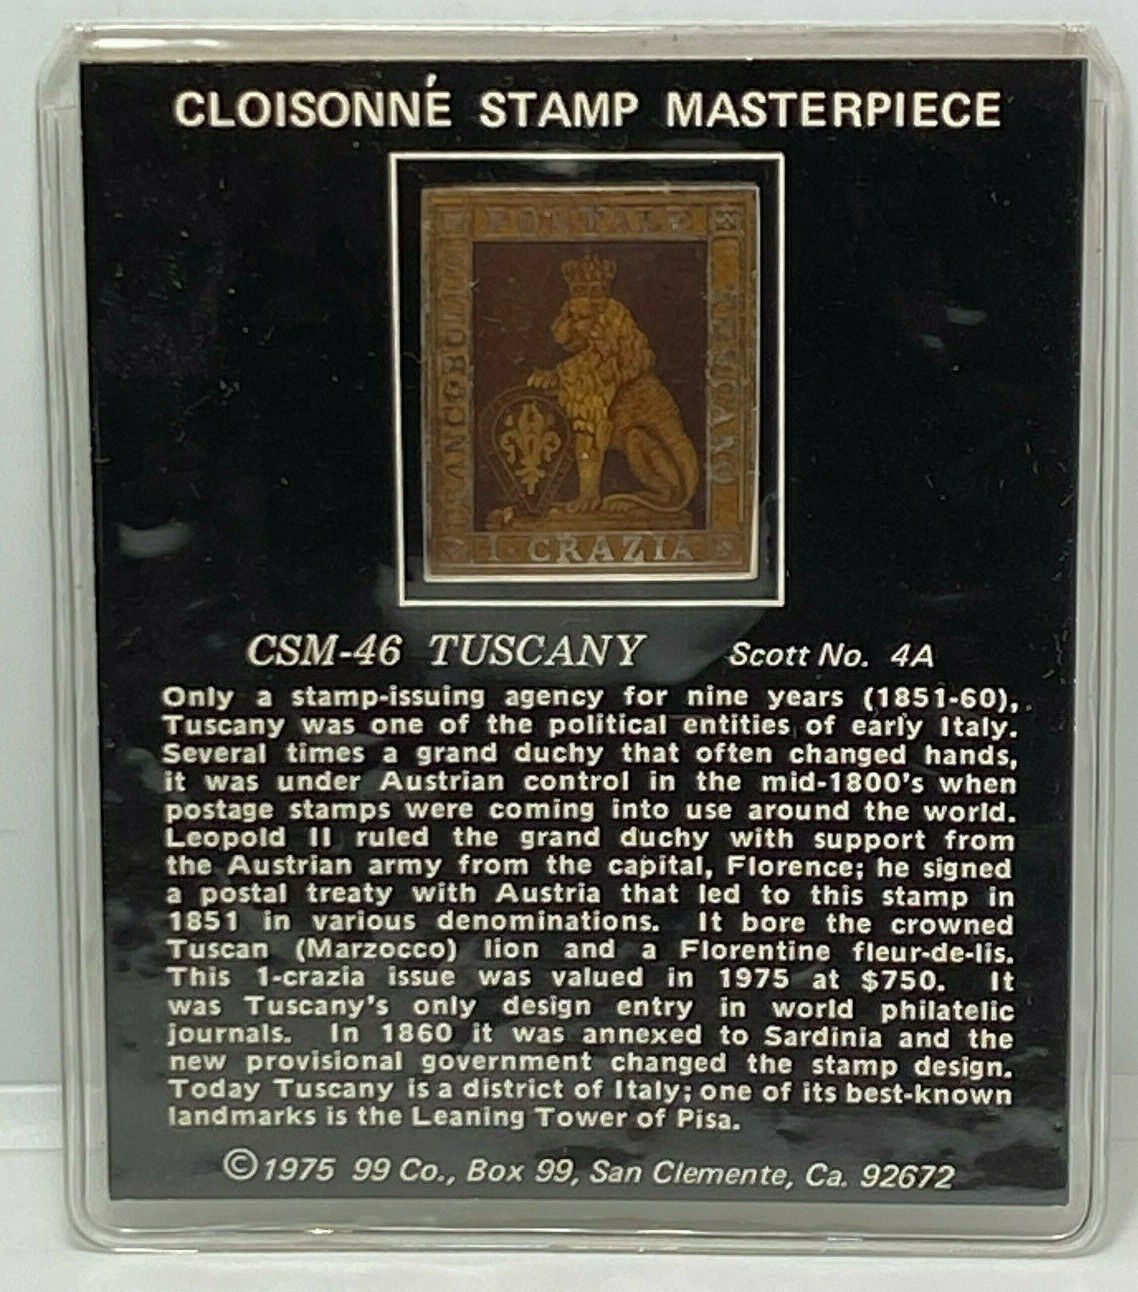 Cloisonne Stamp Masterpiece Csm-46 Tuscany 1.000 Fine Silver W/ Plastic Sleeve